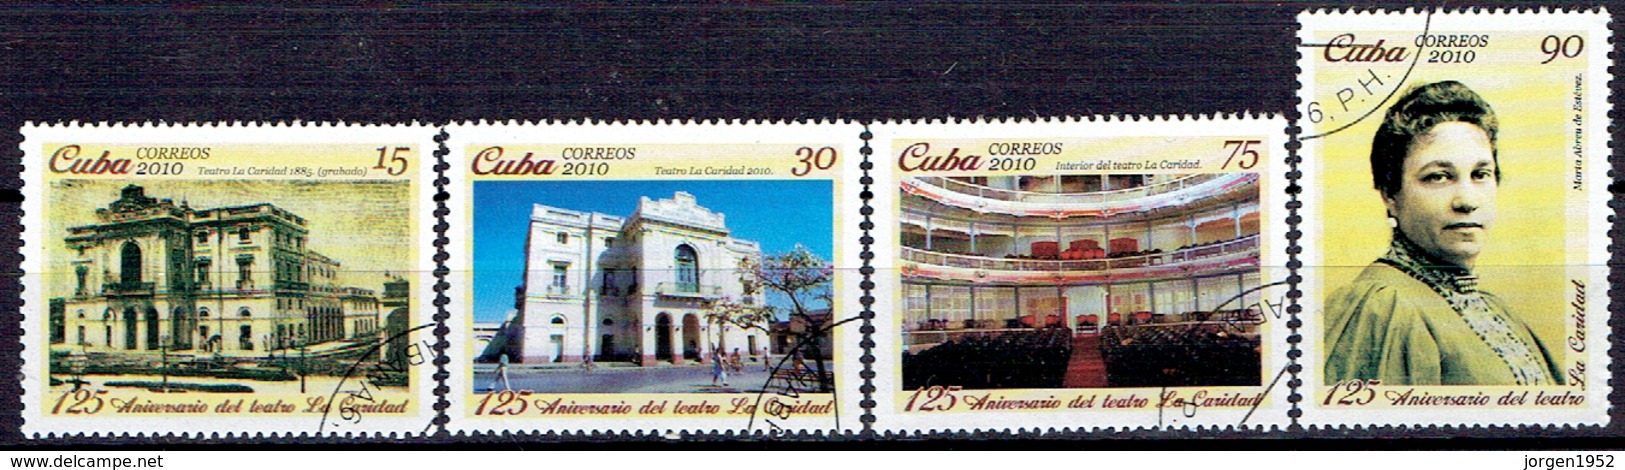 CUBA # FROM 2010 STAMPWORLD 5449-52 - Used Stamps